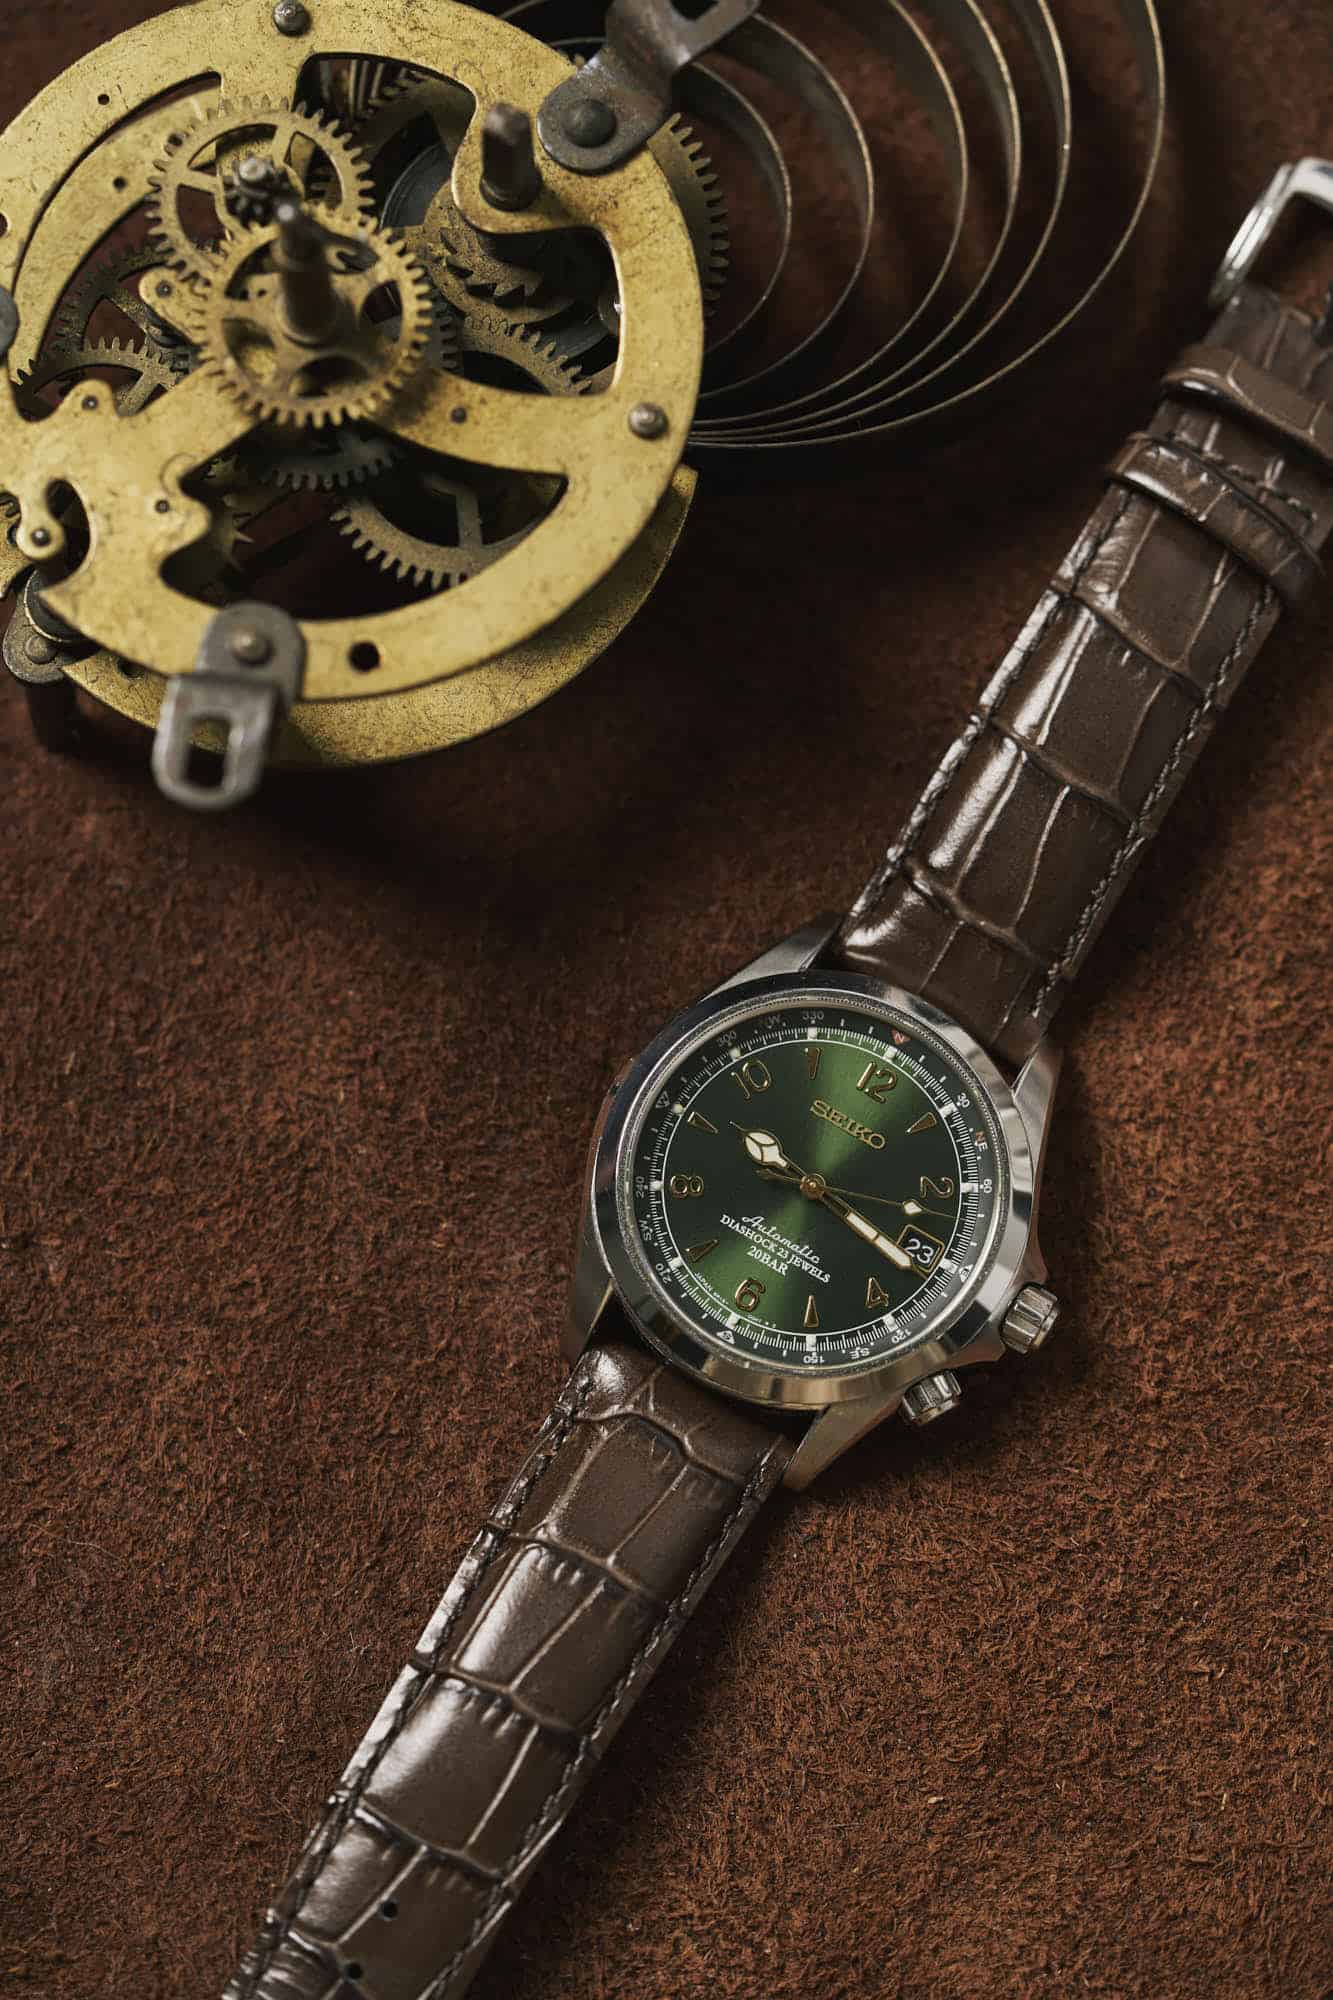 VIDEO] Missed Review: The Seiko Alpinist SARB017 - Worn & Wound